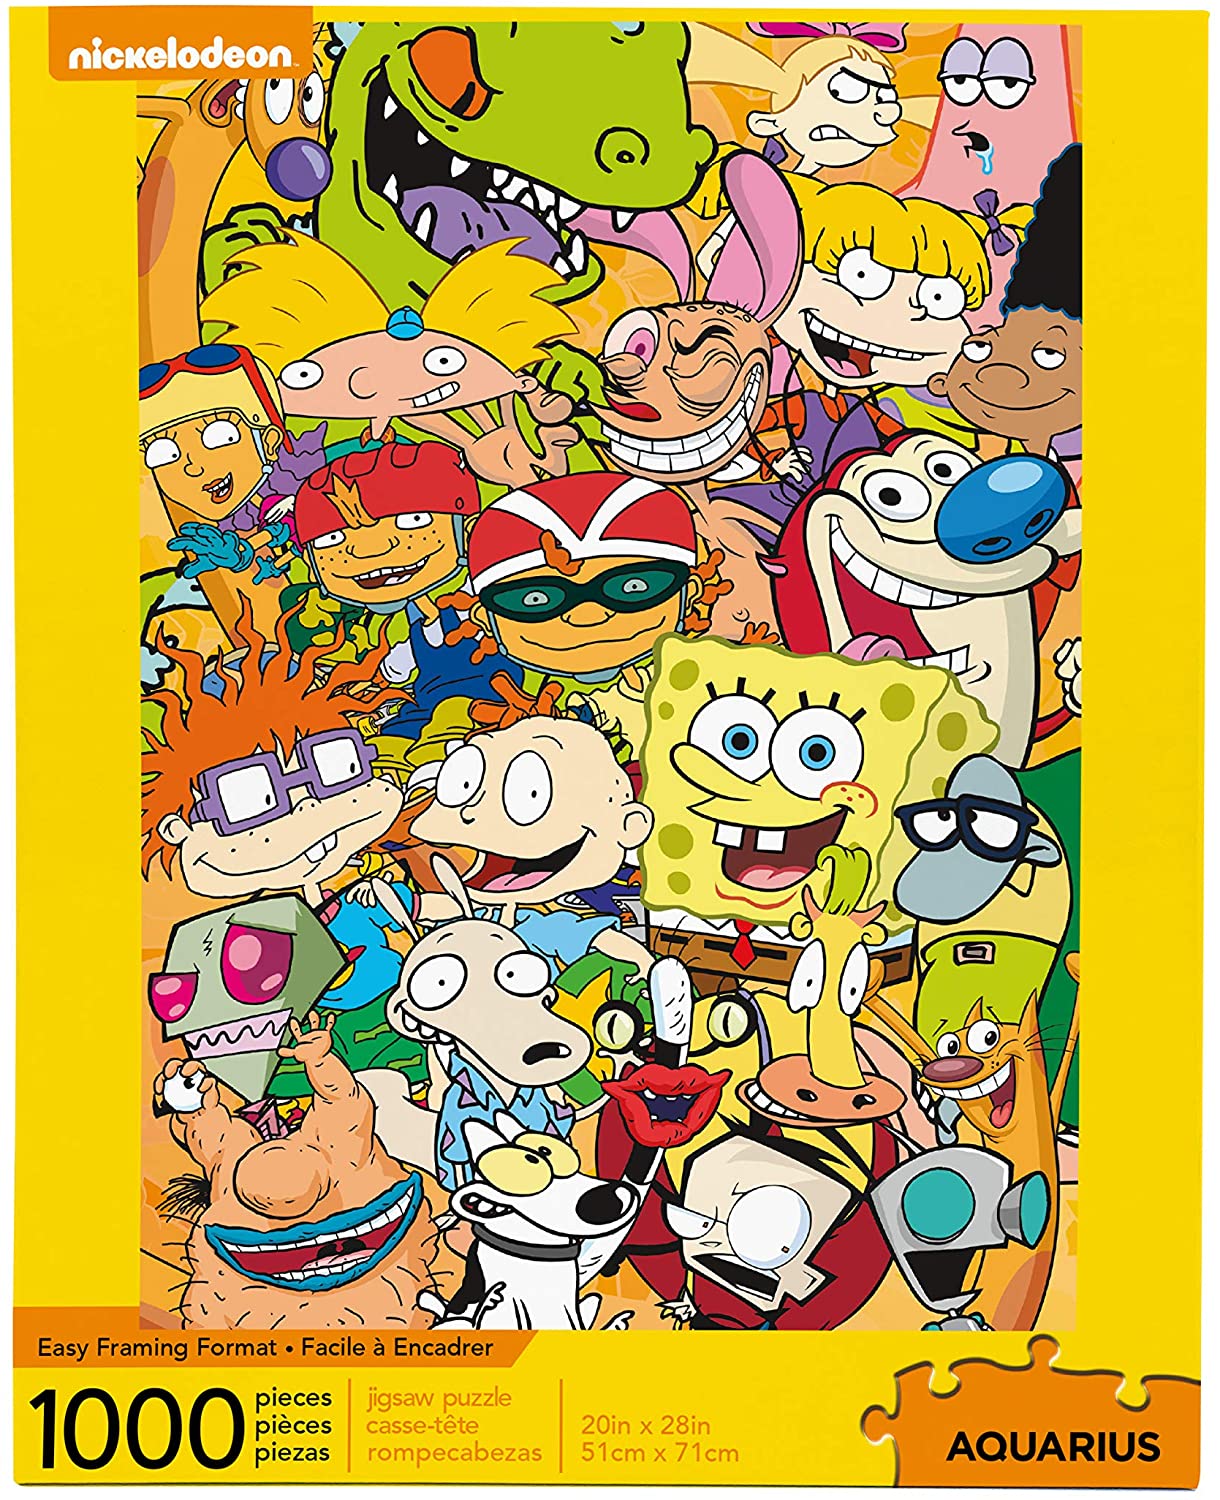 Nickelodeon Cast (1000 pc puzzle)